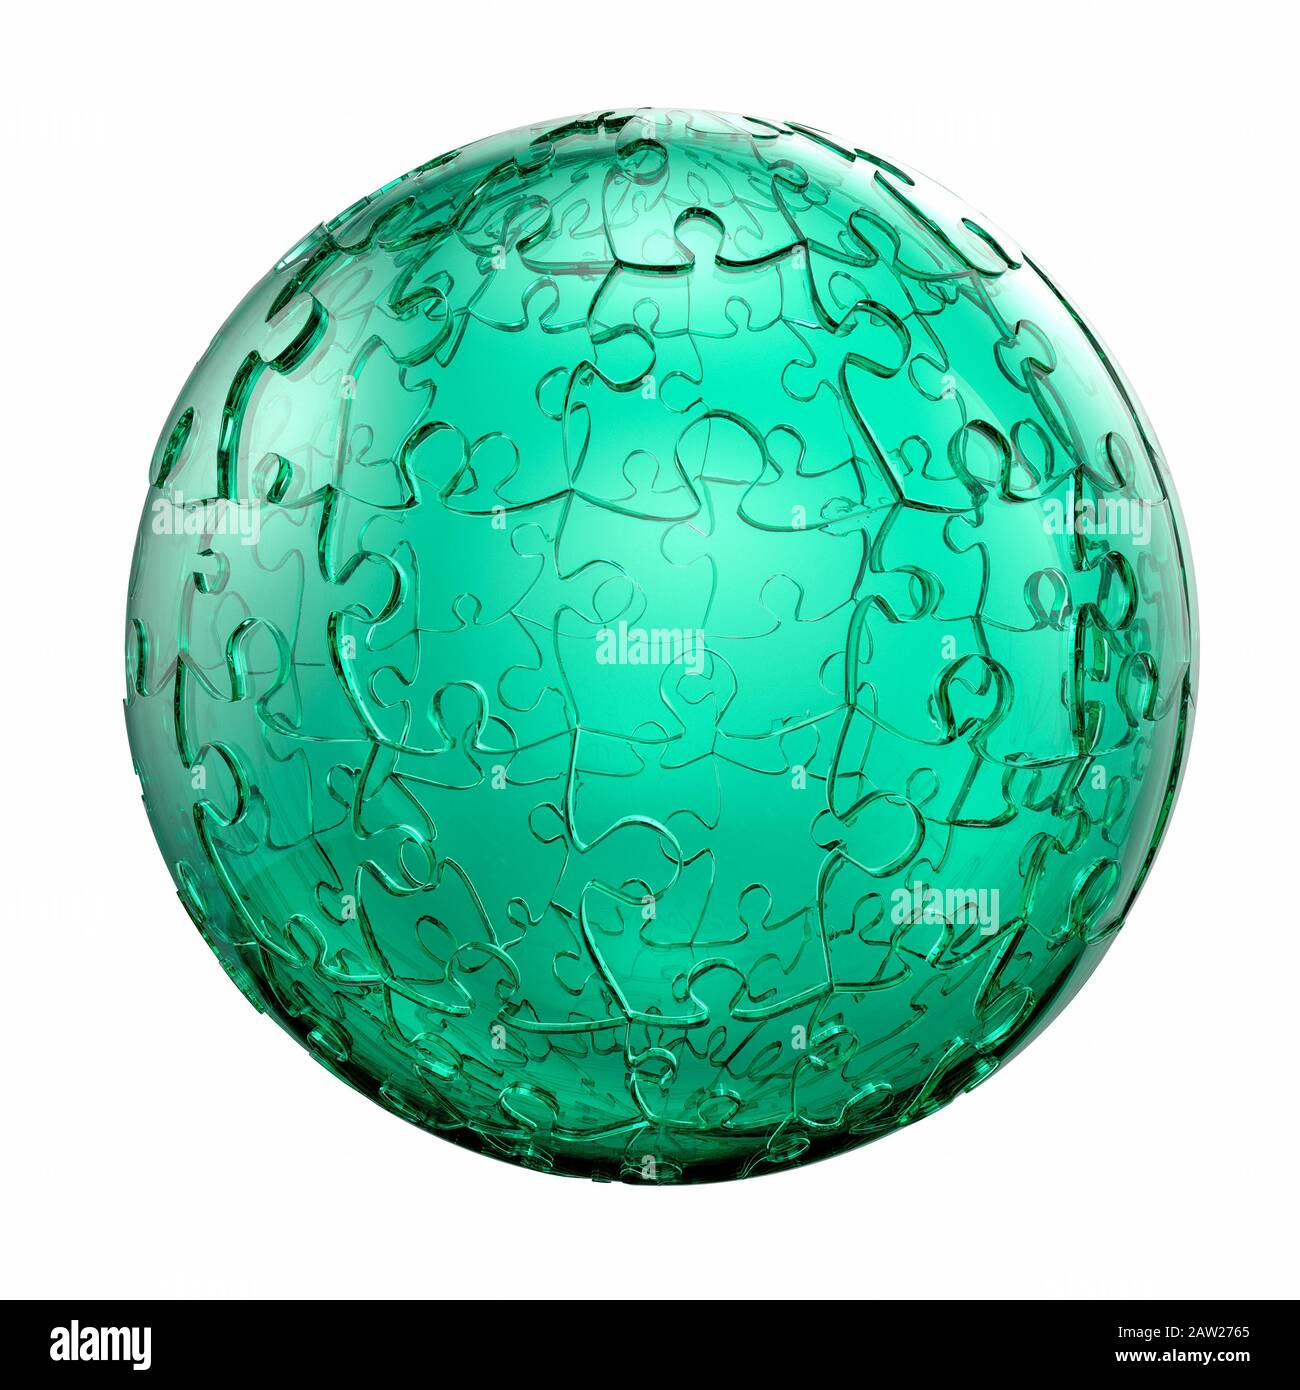 Solving Climate change concept, a green glass globe jigsaw puzzle representing the need for the planet earth to address the problem Stock Photo